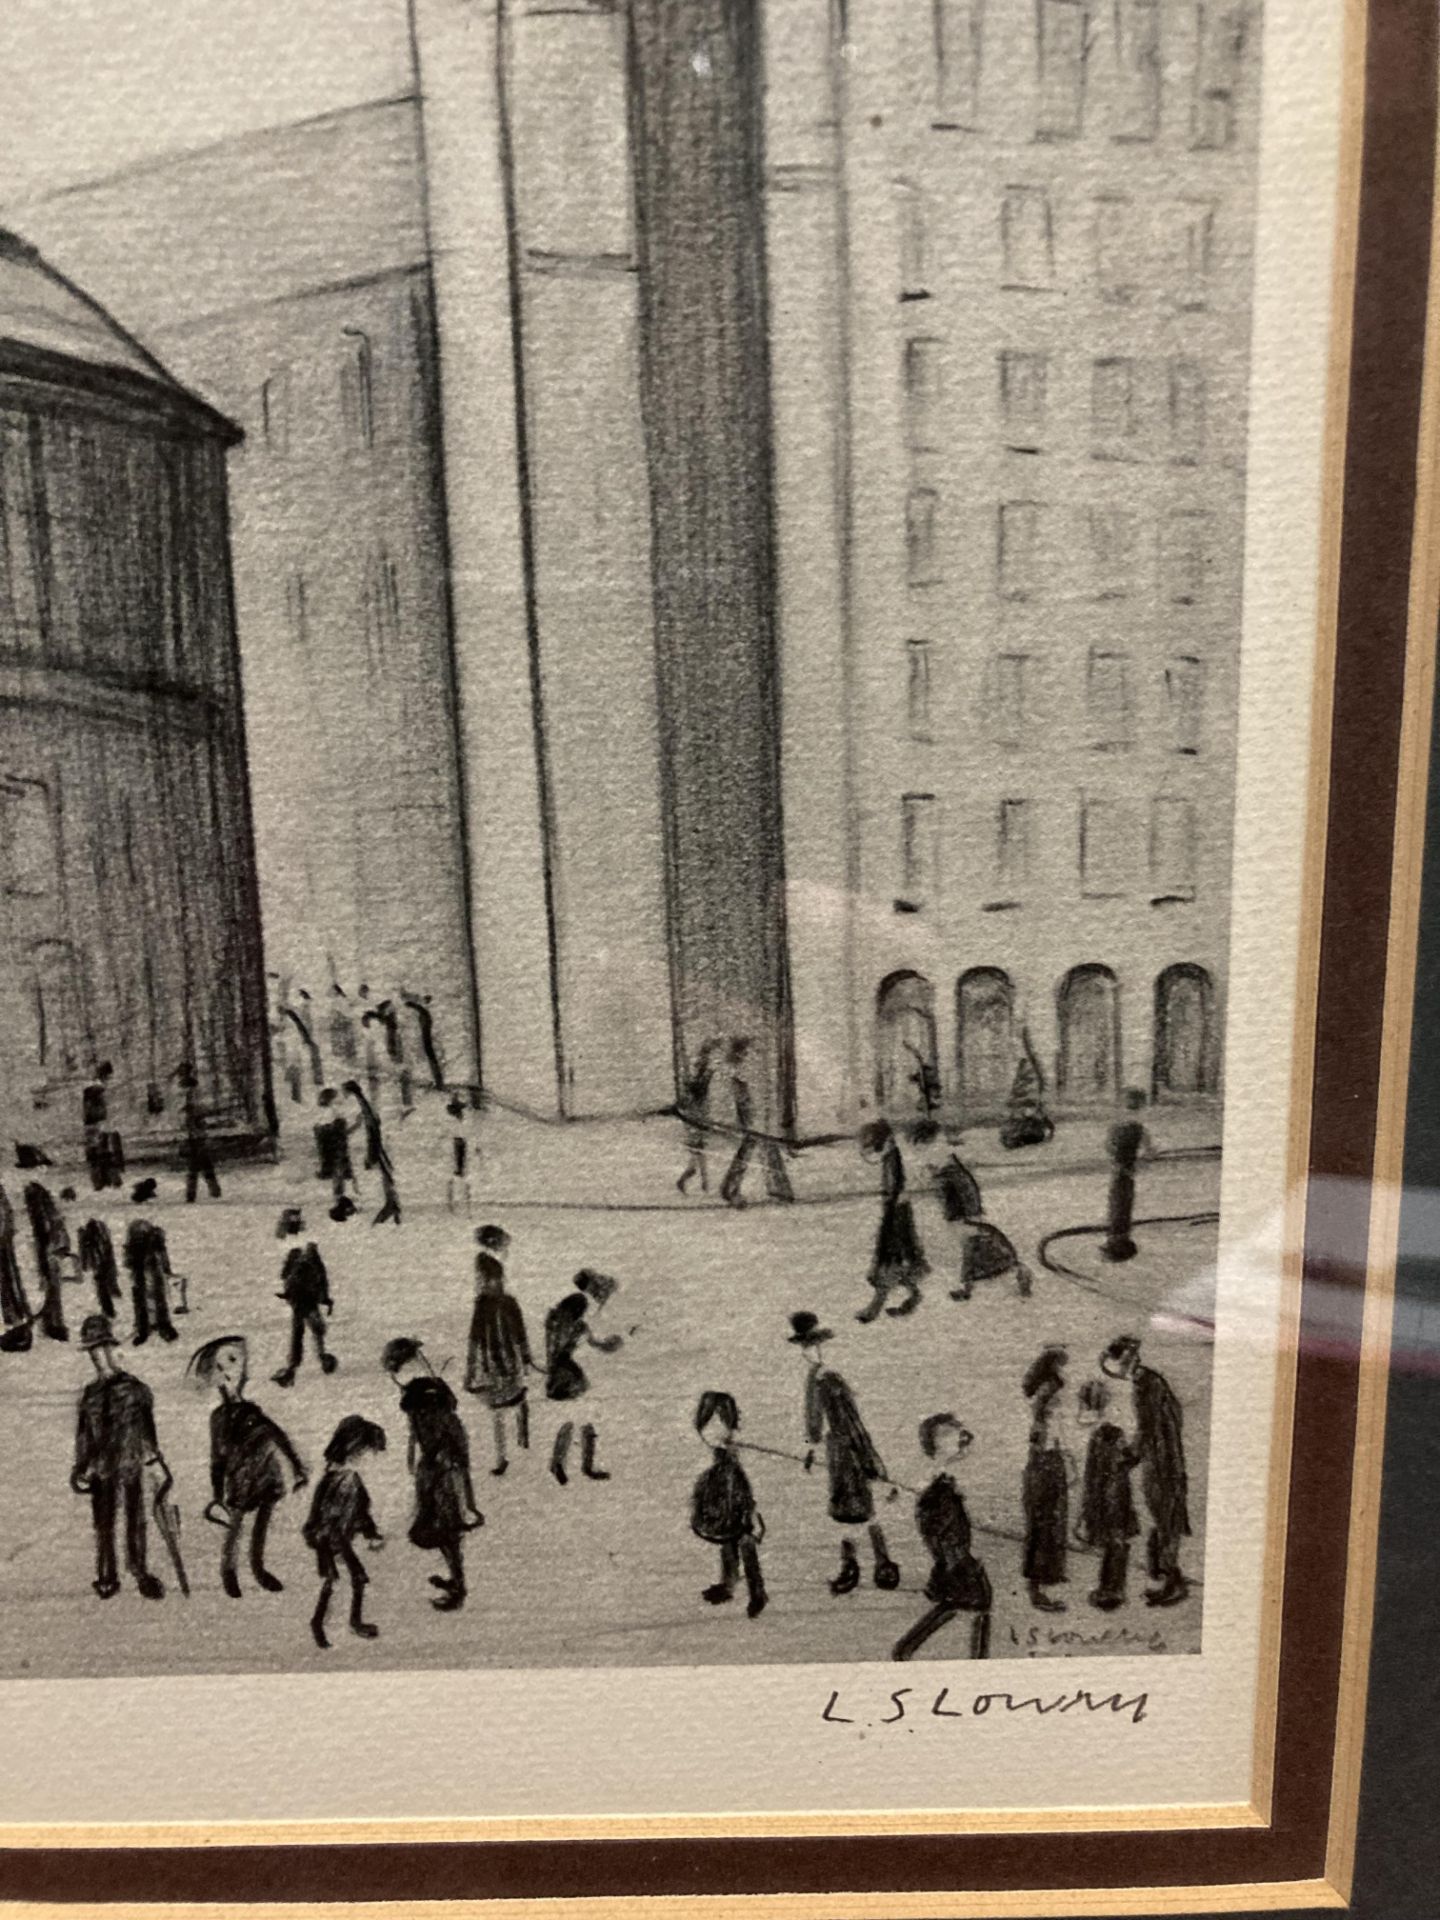 † L S Lowry (1887-1975), 'Reference Library', lithograph on paper, signed in pencil, - Image 13 of 17